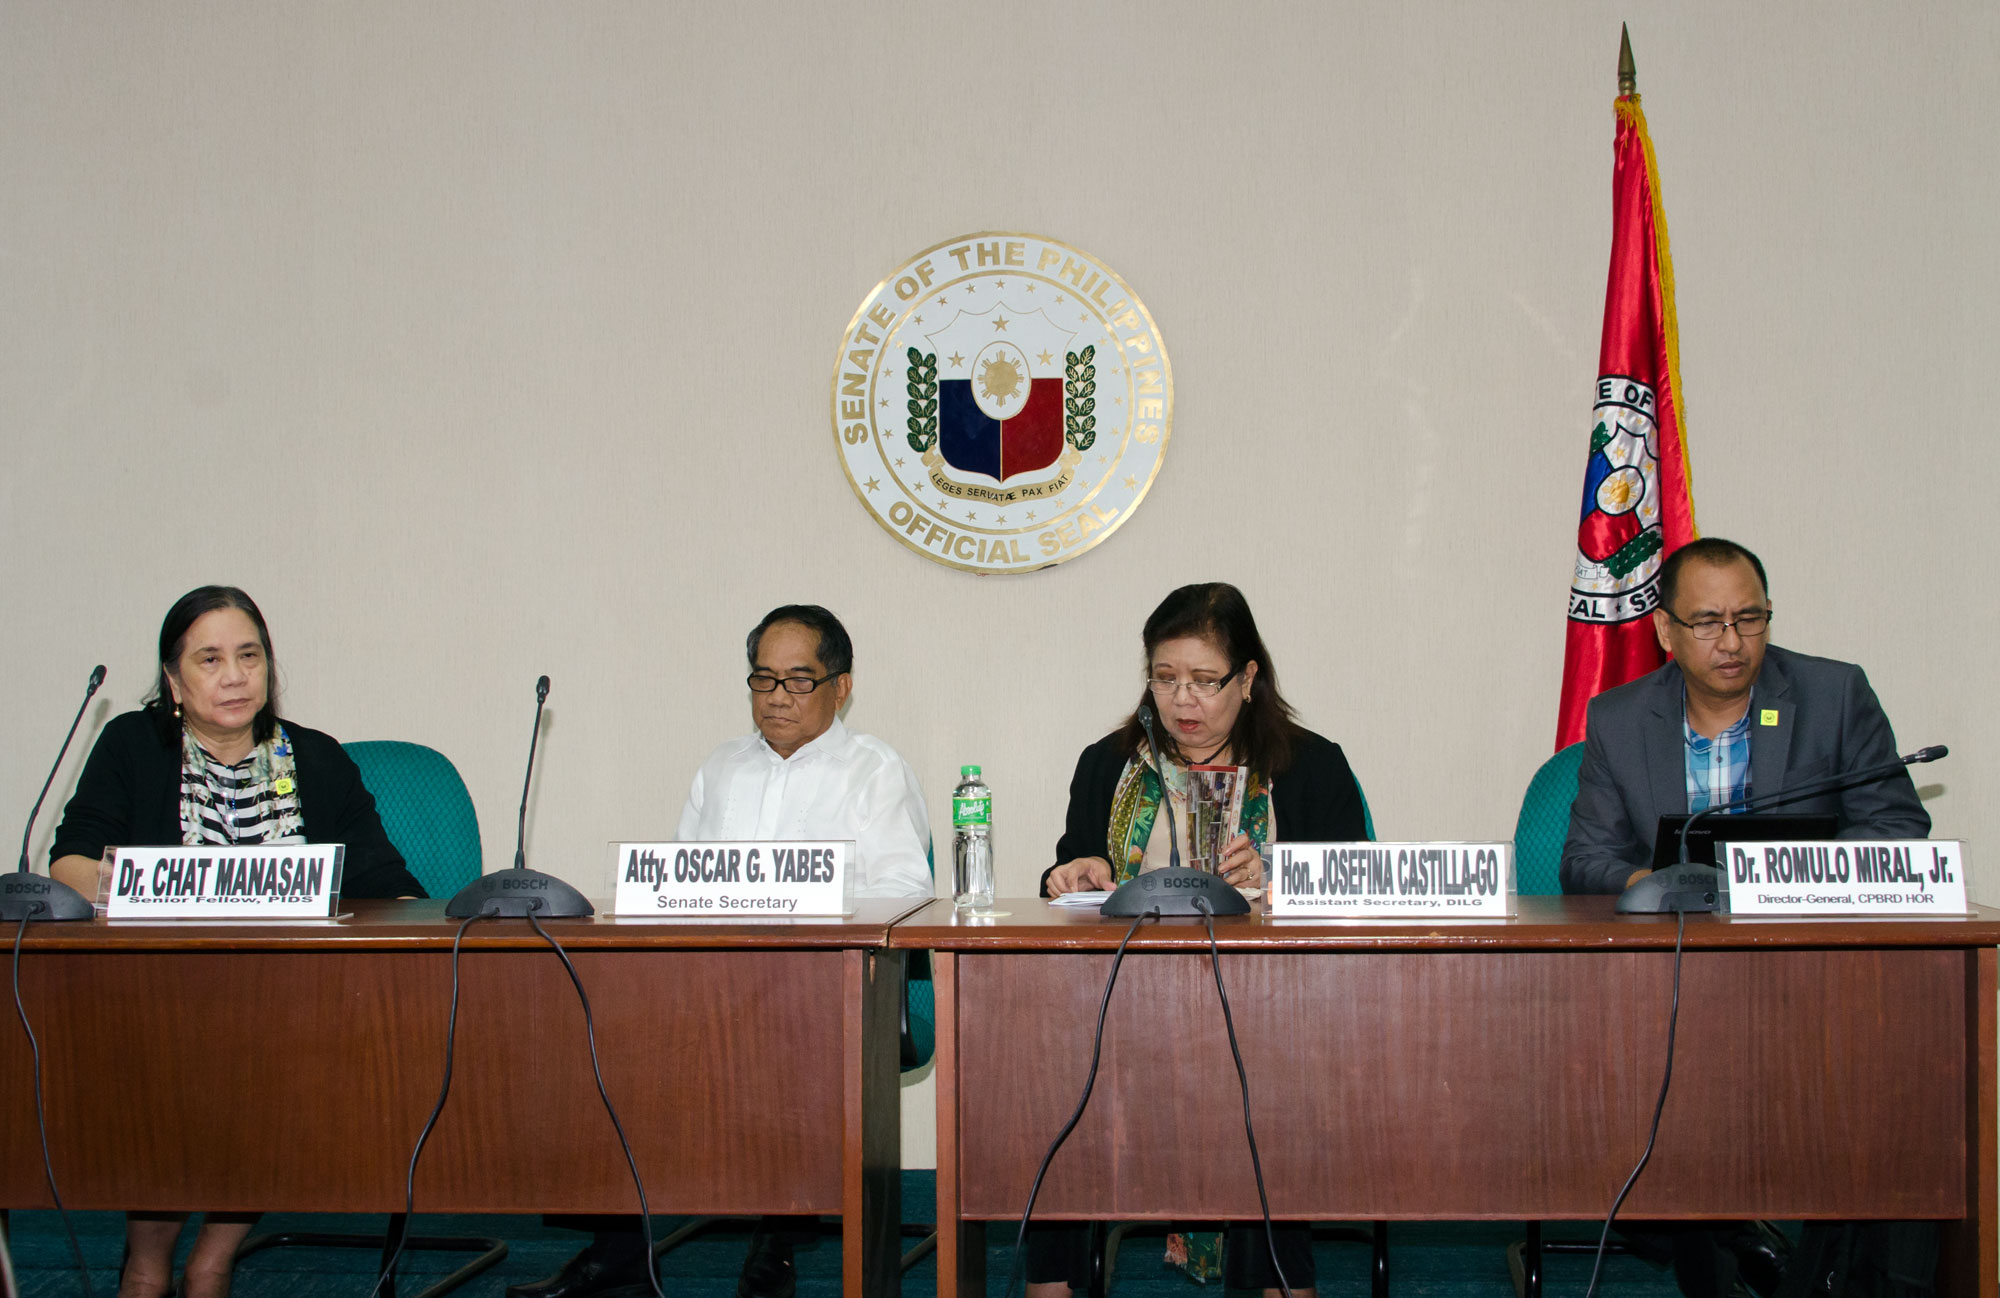 Senate Centennial Lecture Series “Assessment of the Bottom-up Budgeting Process for FY 2015-ggm_7845.jpg